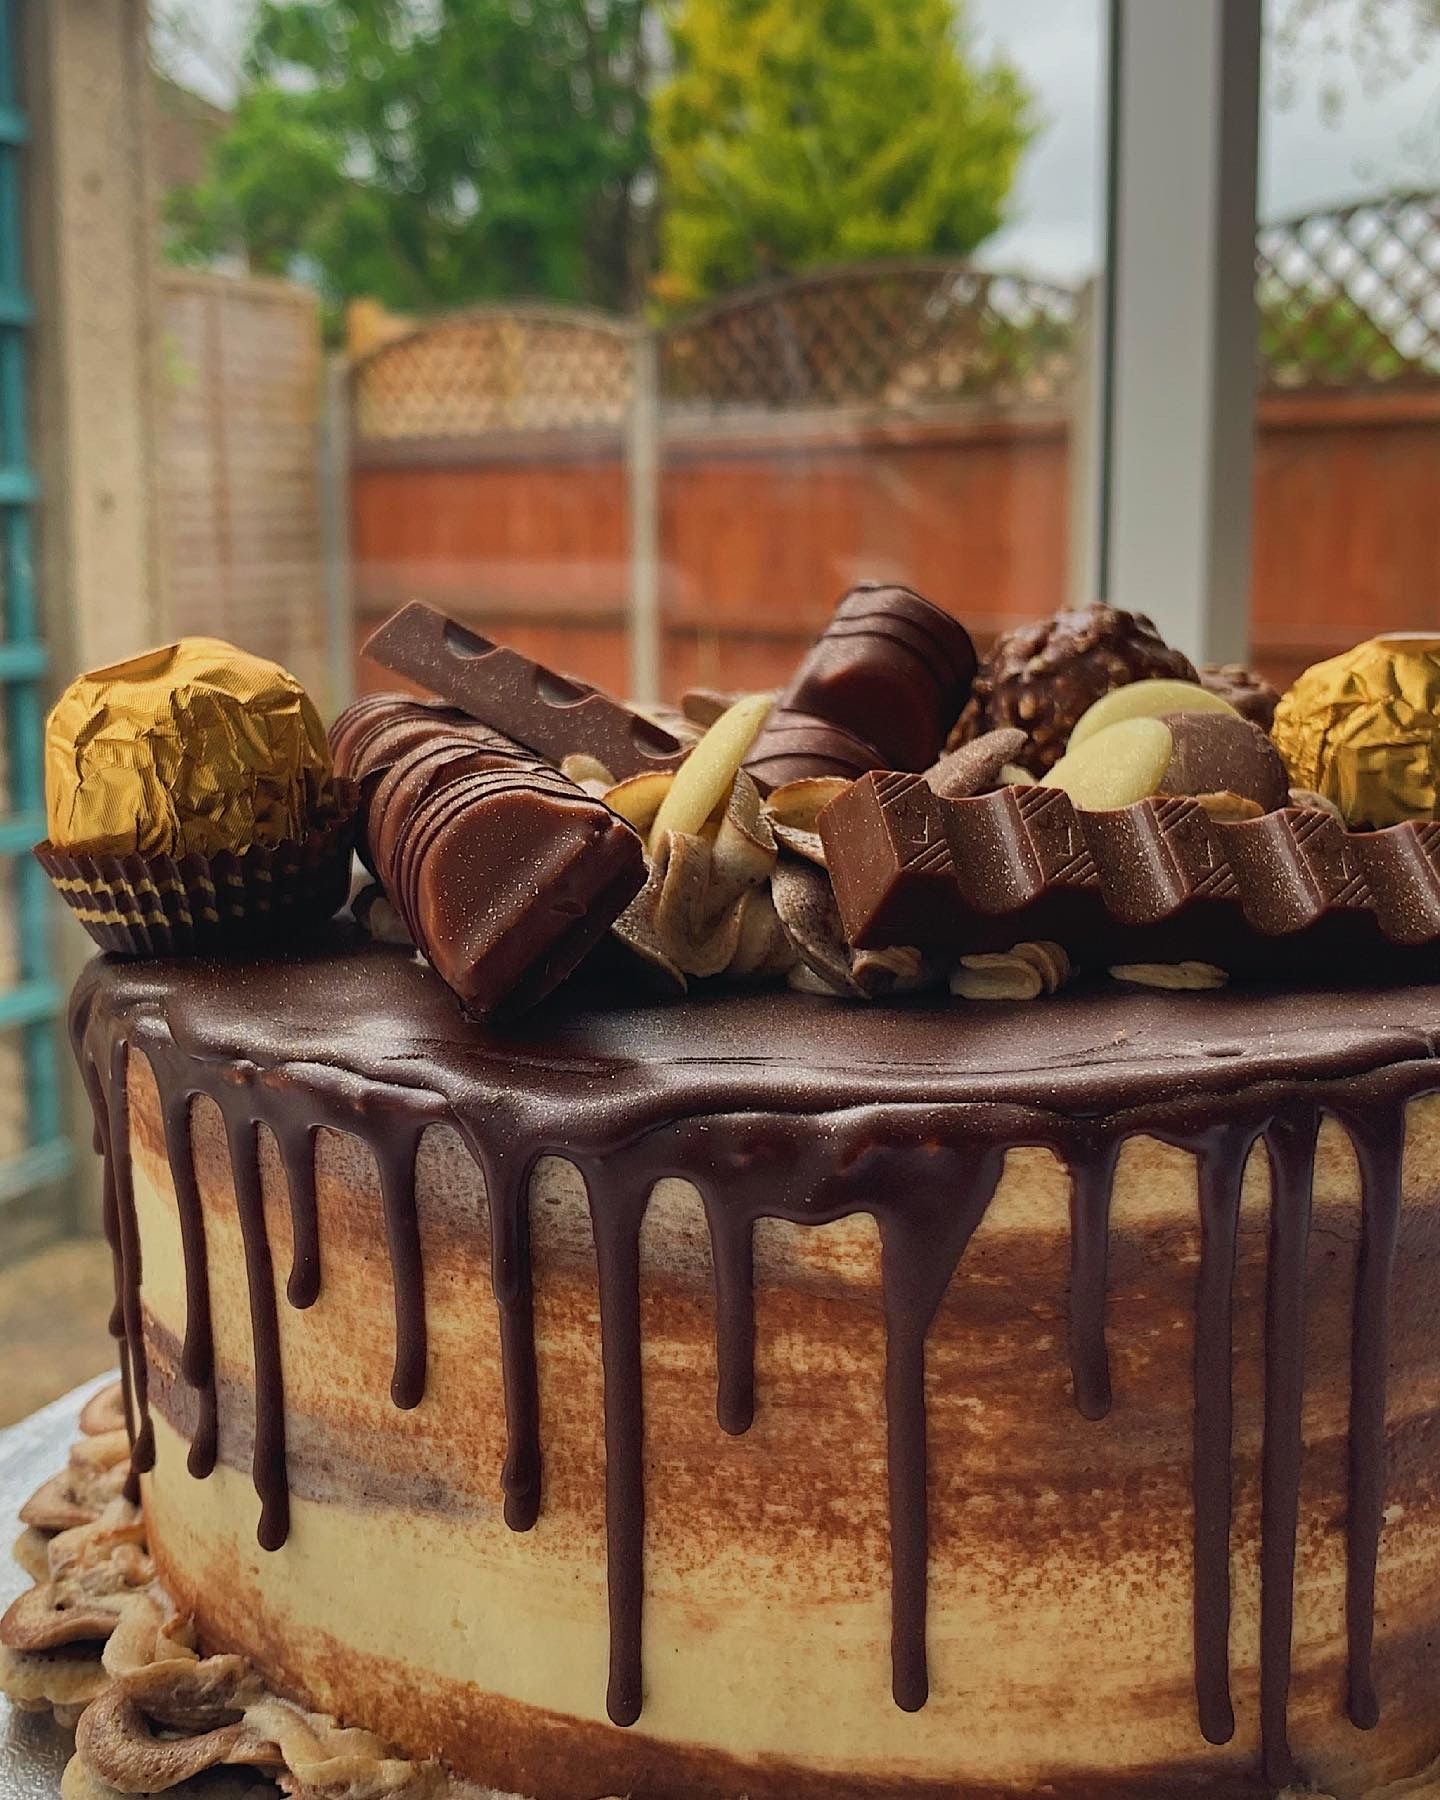 One of Bobby's Bakes creations is a cake decorated with Kinder and Ferrero chocolates